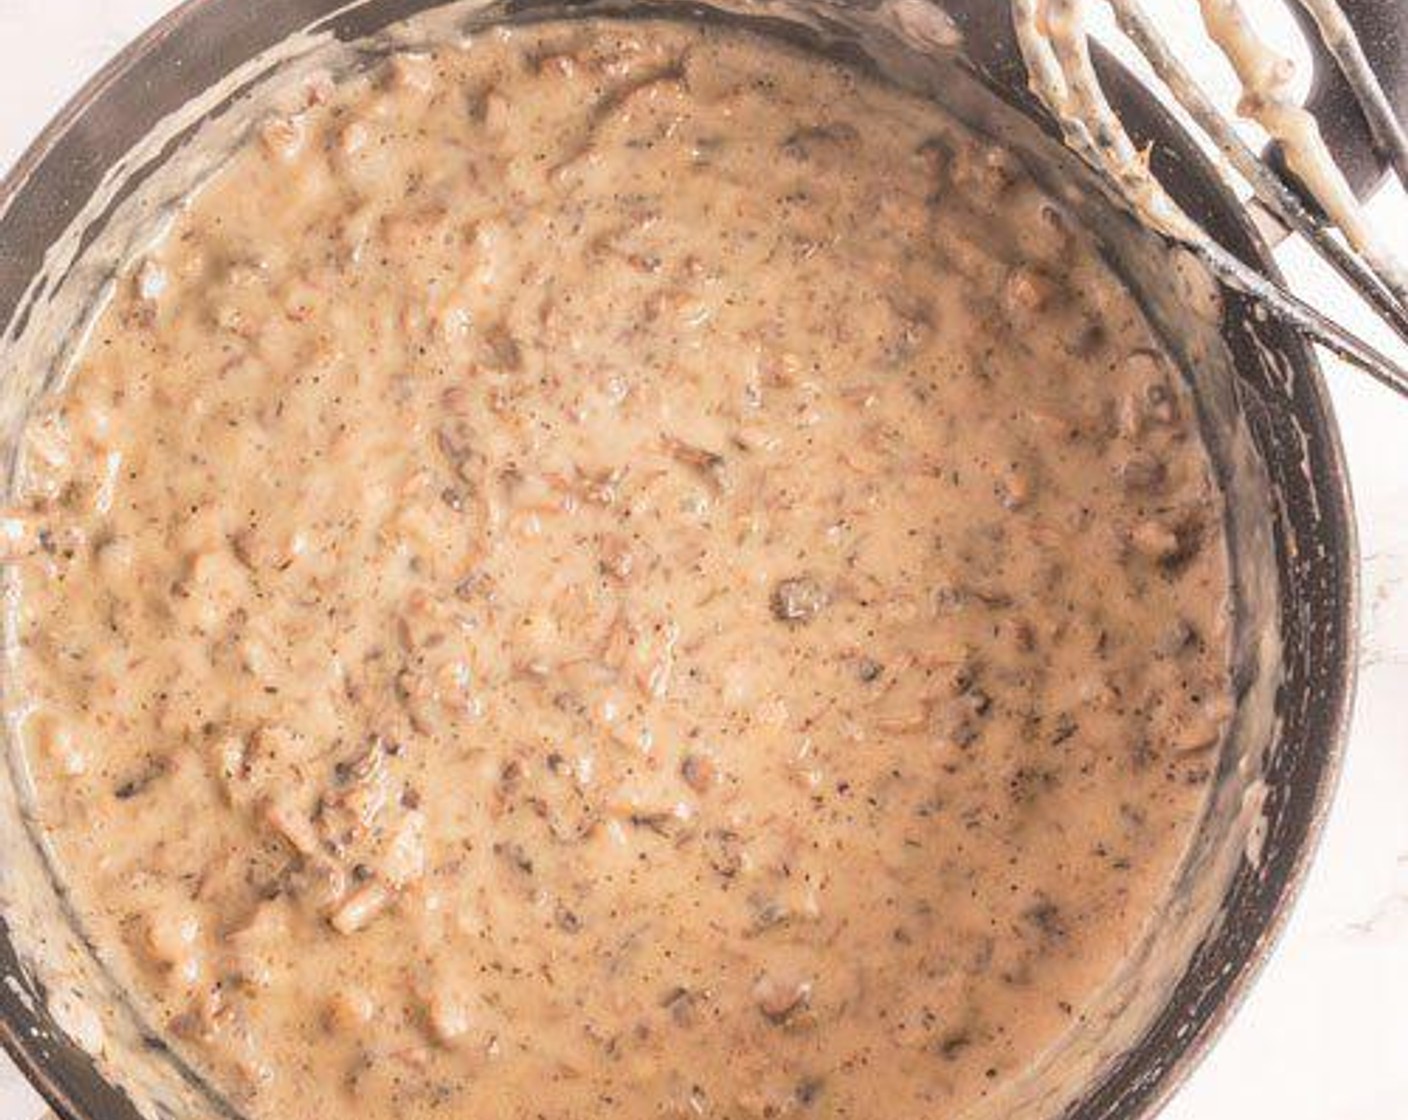 step 3 In separate pan, whisk Almond Milk (2 cups), All-Purpose Flour (3 Tbsp), Buttery Spread (2 Tbsp), and Soy Sauce (2 Tbsp). Add Brown Mushrooms (2 cups) and Greek Seasoning (1 tsp) and continue to whisk while bubbling until thick.